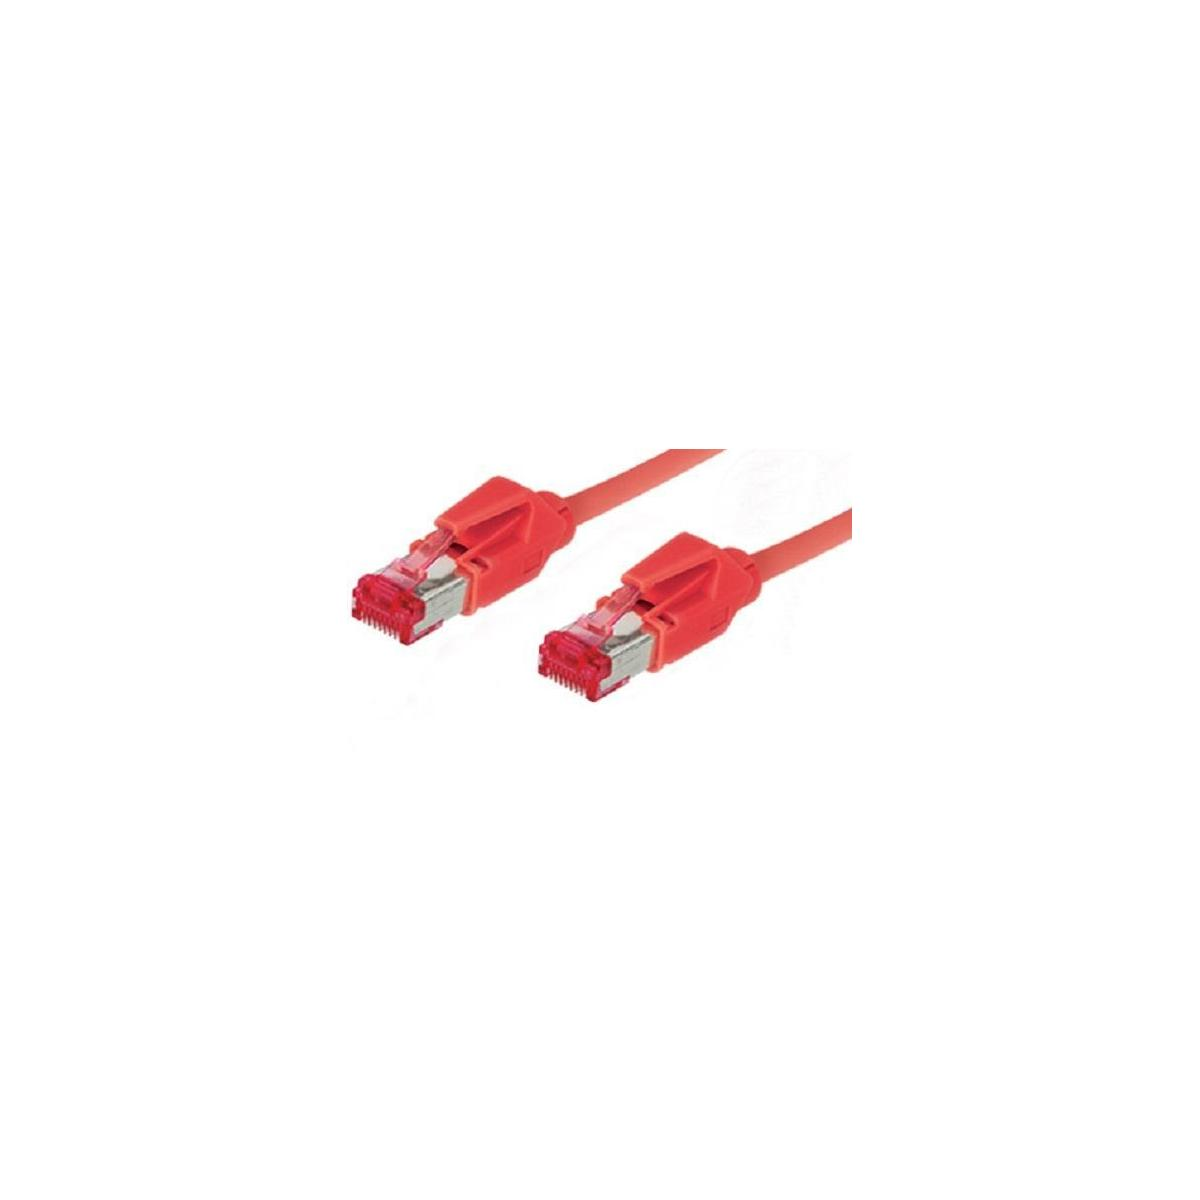 VARIA GROUP 8066-101R Patchkabel Cat.6, Rot